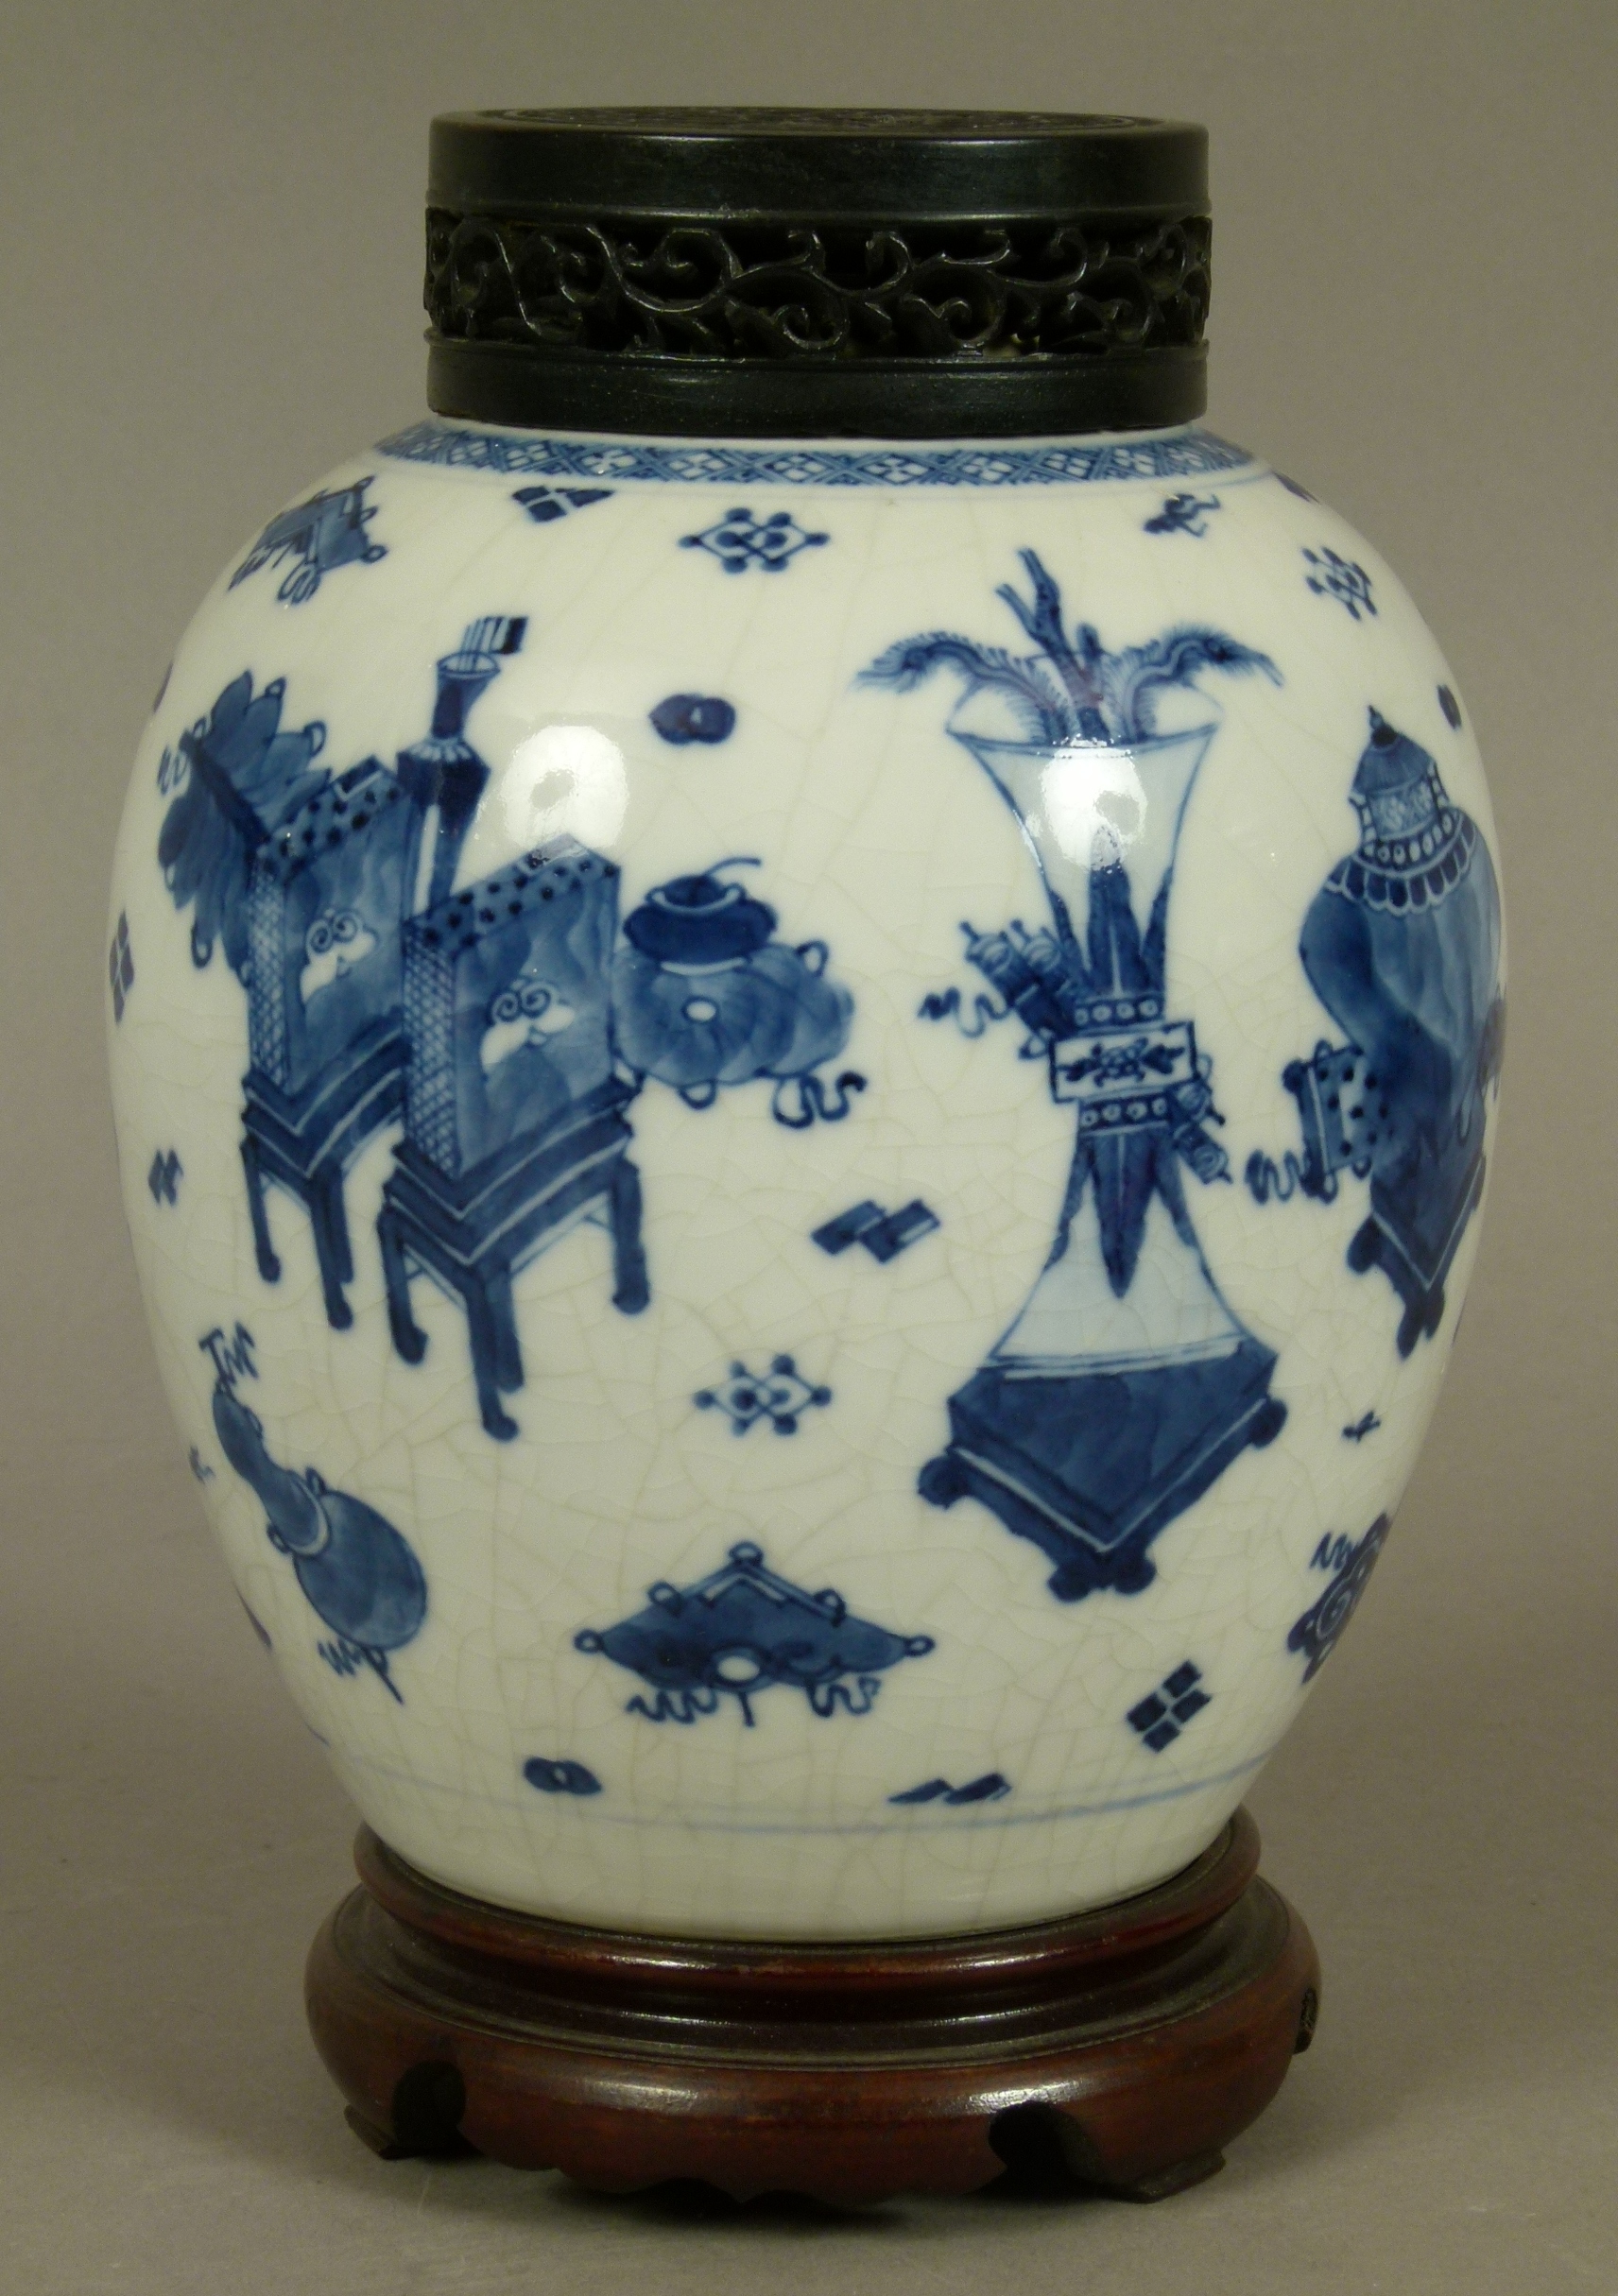 CHINESE BLUE AND WHITE BALUSTER JAR, the crackle glazed body painted in underglaze blue with